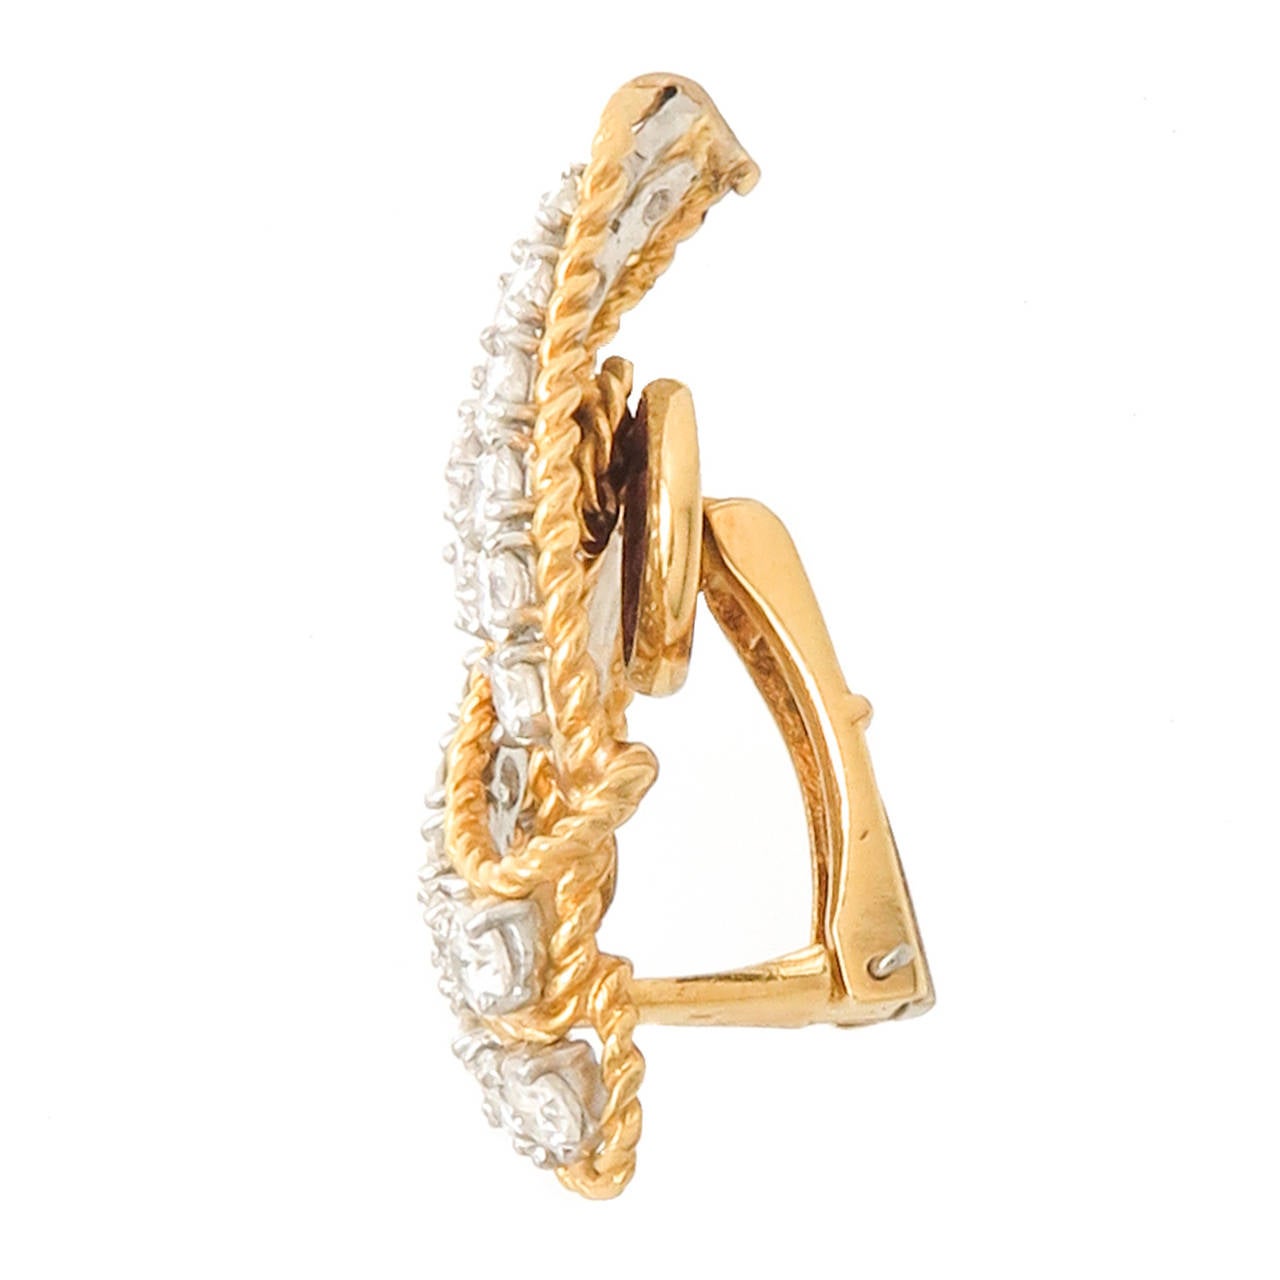 Superb 18 Karat Yellow Gold and Diamond Ear Clips by Pierre Sterle, Paris, a twist rope design surrounds 2 rows of round, very fine brilliant cut Diamonds totaling 6 carats. Clip backs to which posts can be easily added. Measuring 1 1/2 inch in